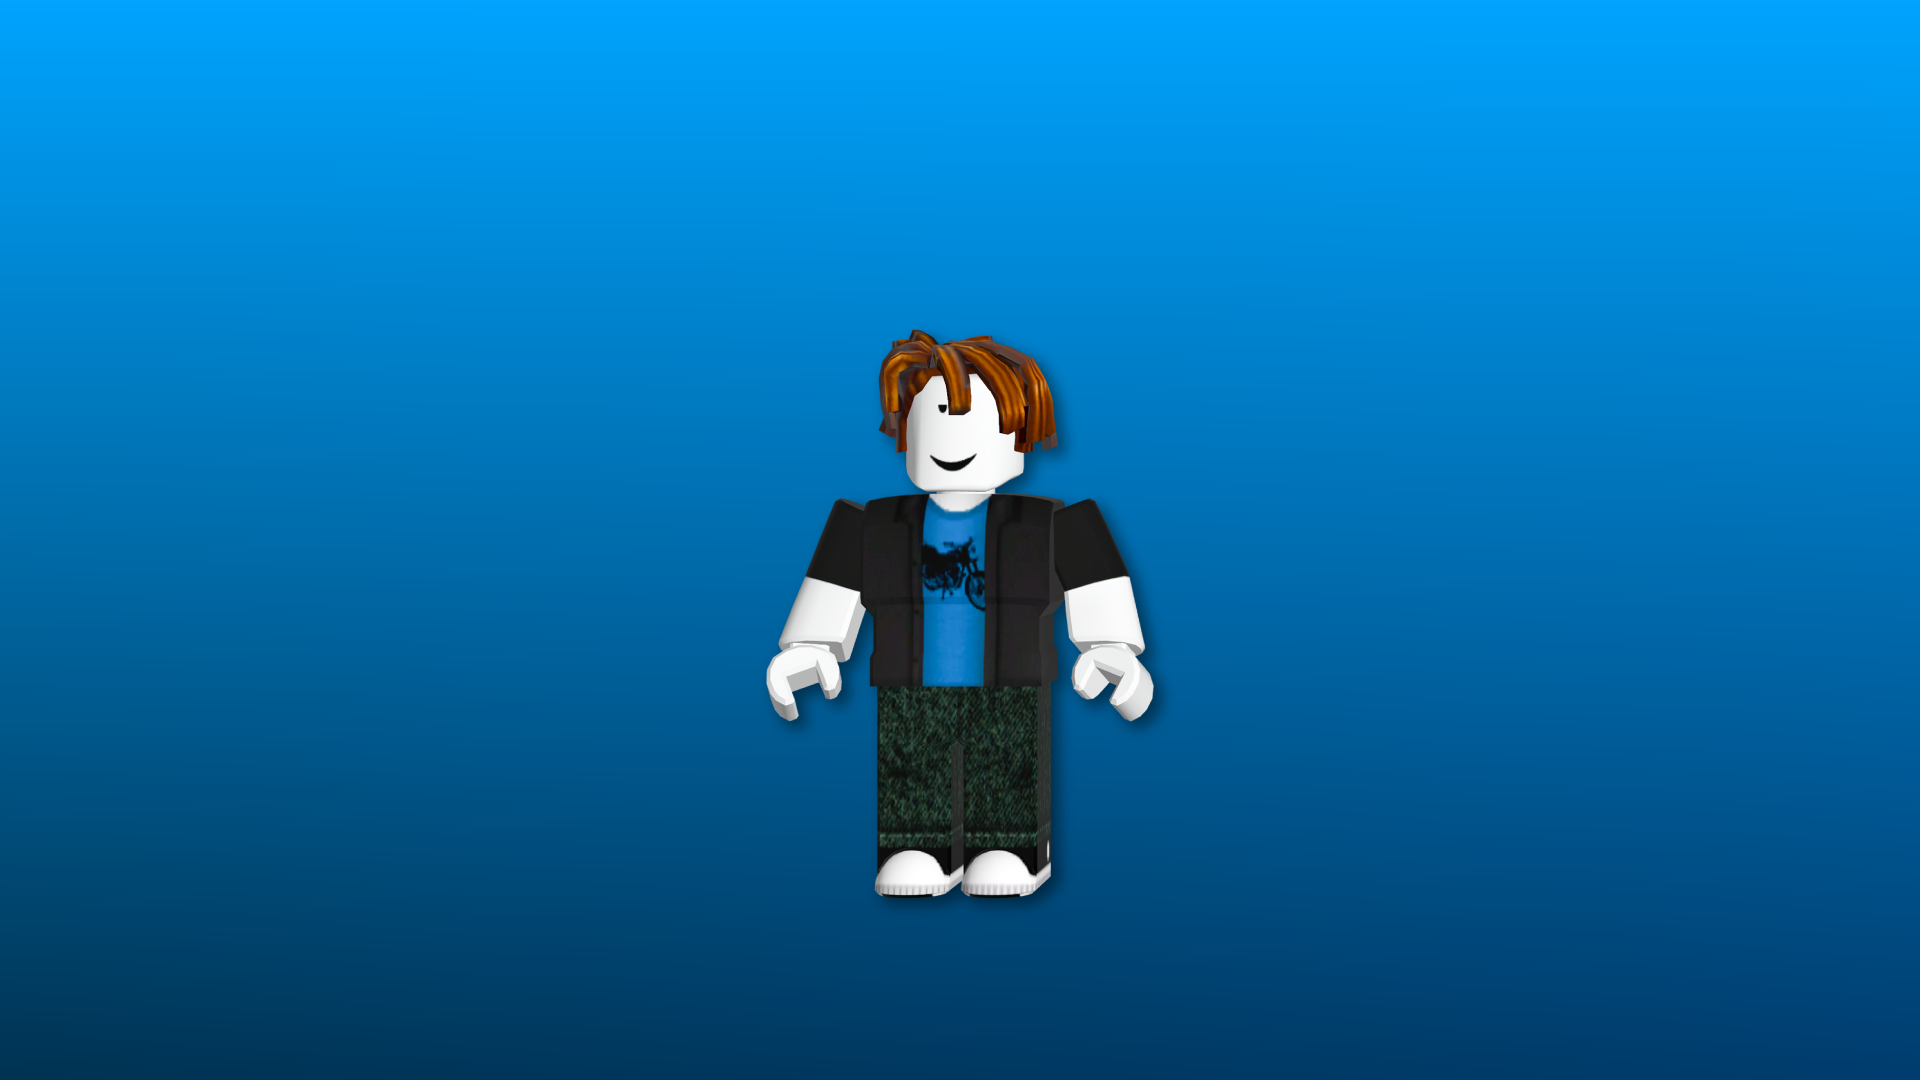 Aesthetic Animated Roblox Character Free Robux Hack 2019 Legit